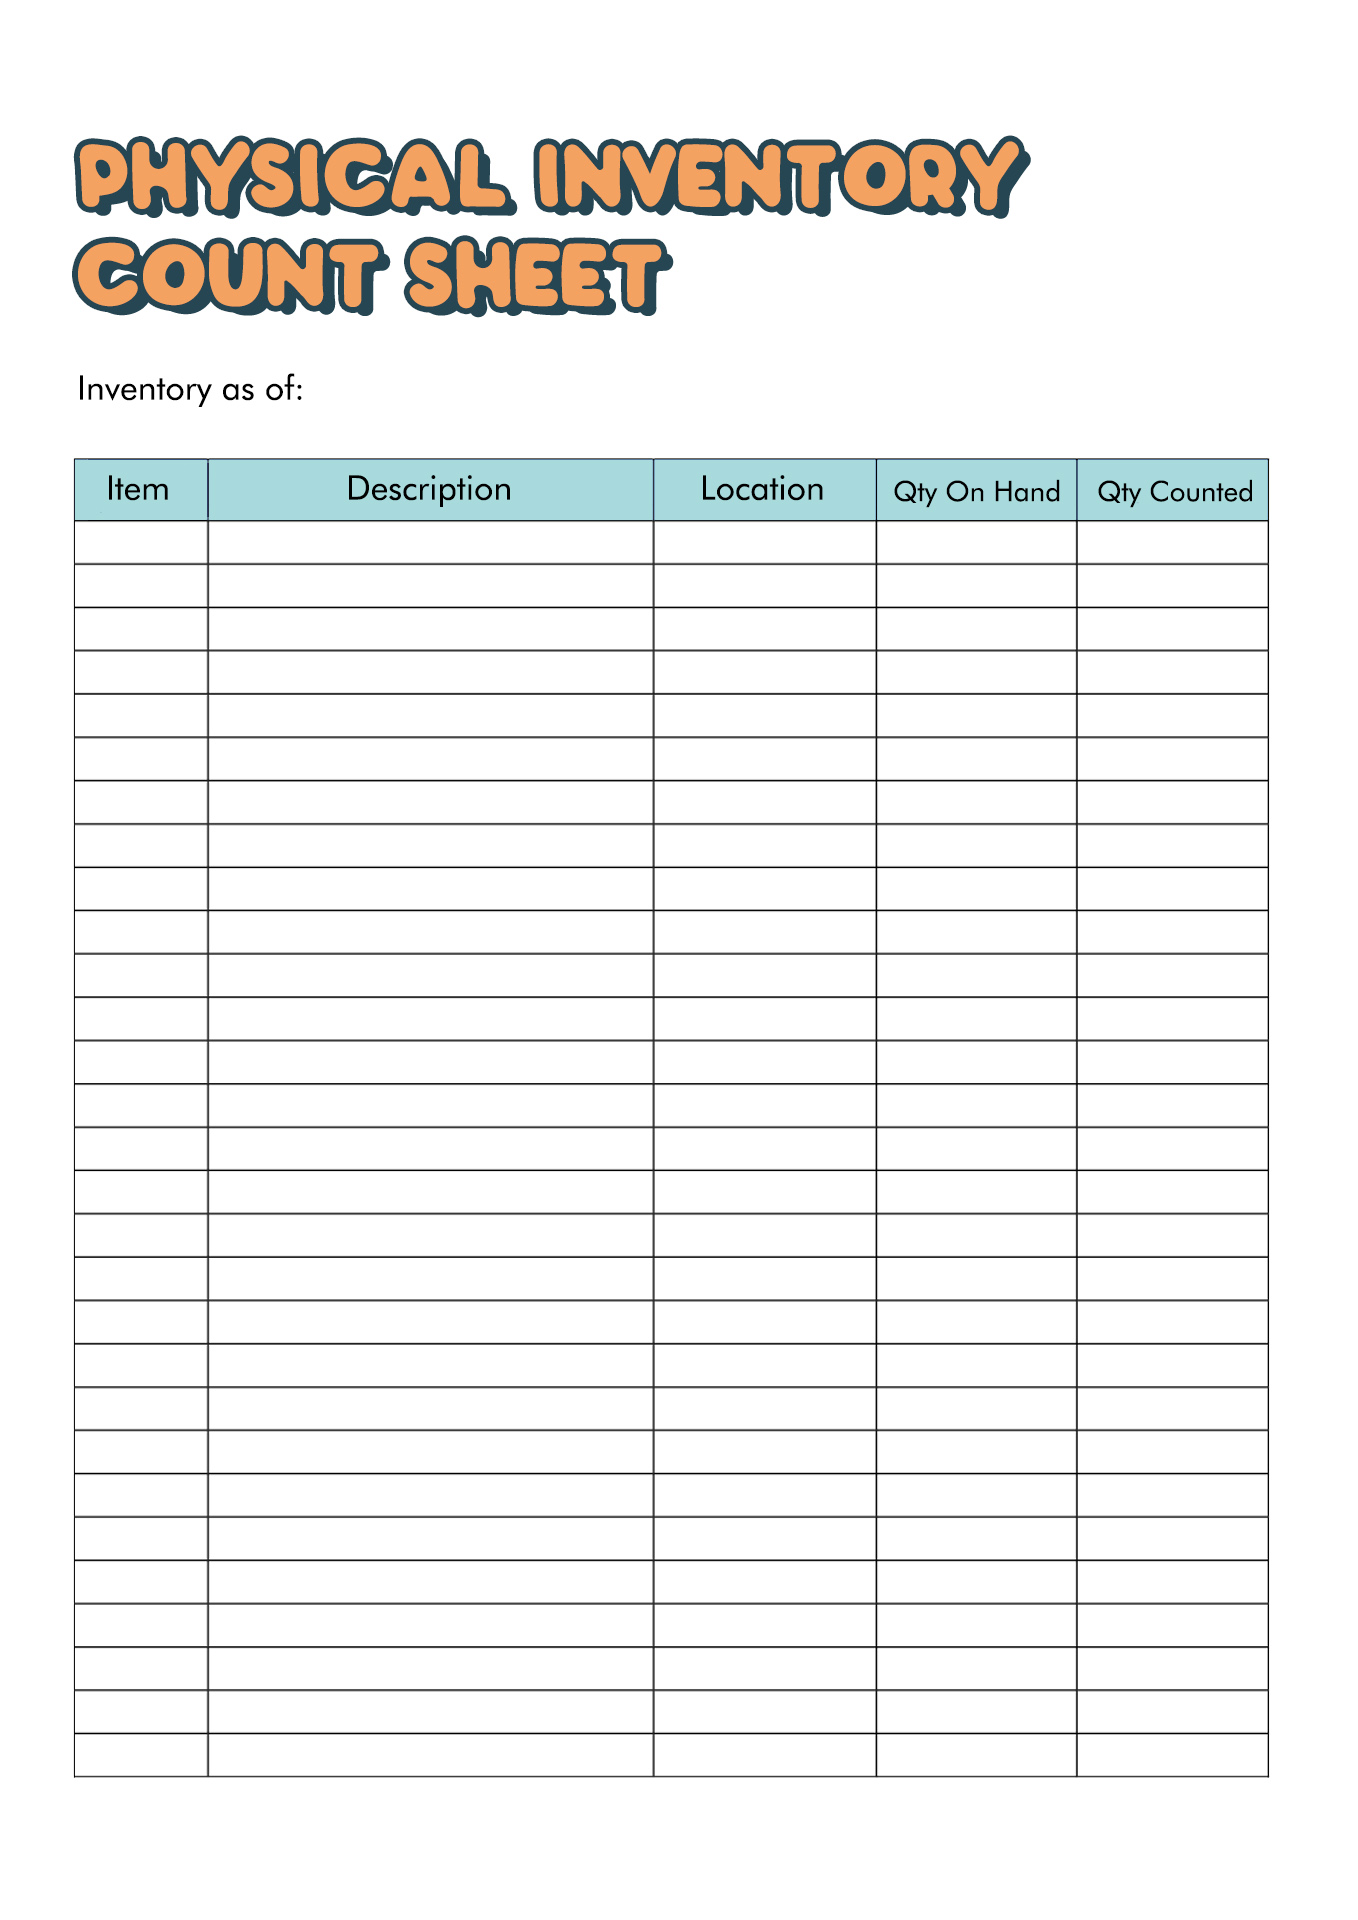 supply-inventory-free-printable-inventory-sheets-printable-templates